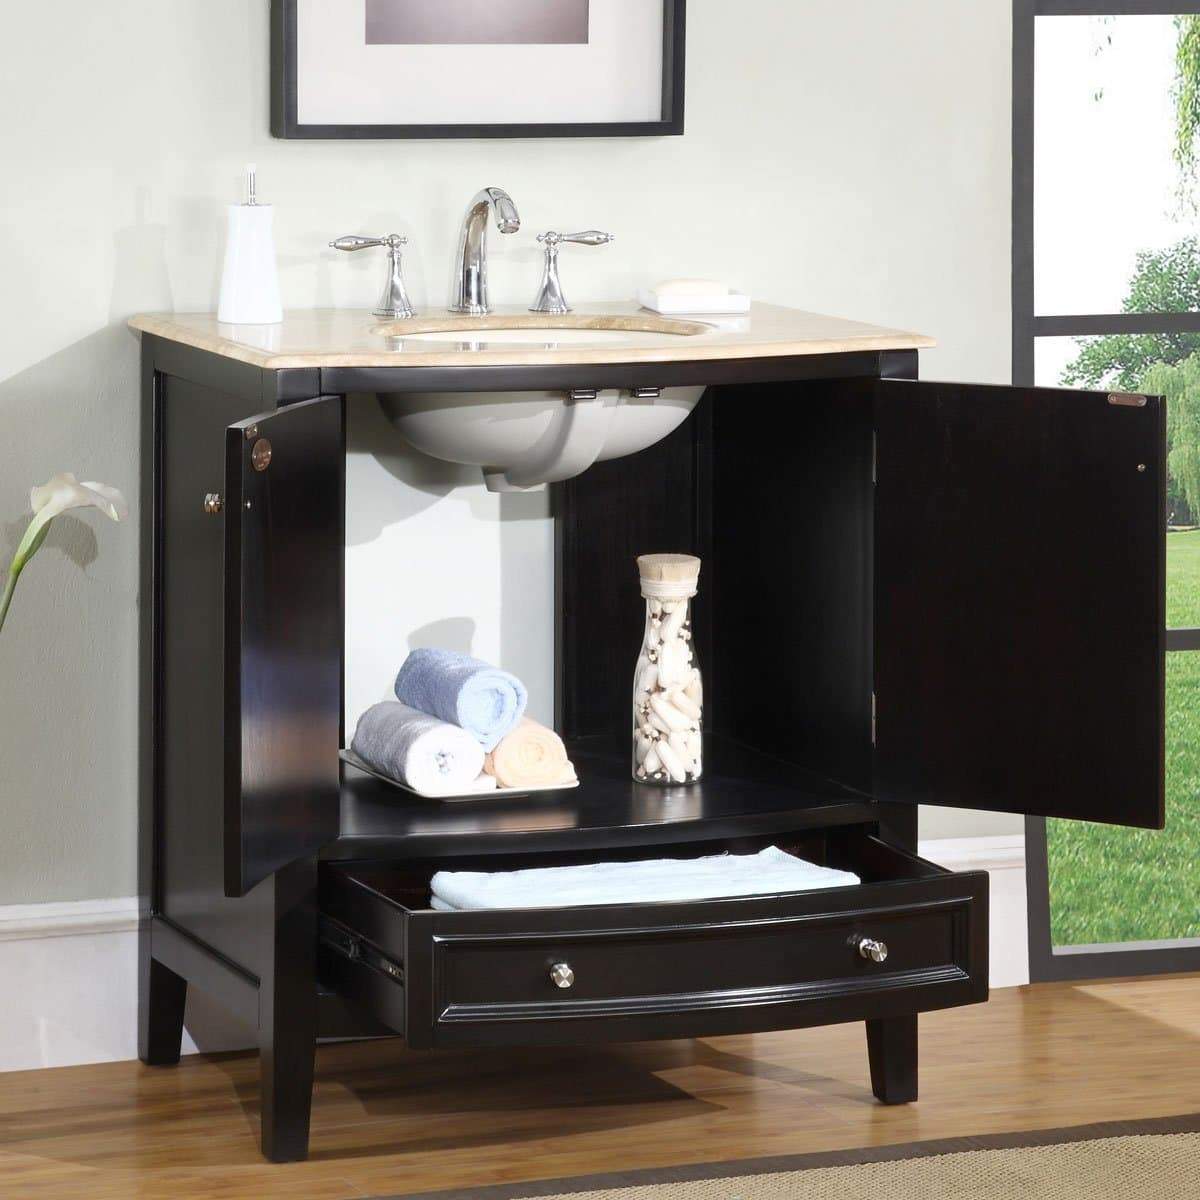 Discover the best silkroad exclusive hyp 0709 t uic 32 travertine stone top single sink bathroom vanity with furniture cabinet 32 dark wood